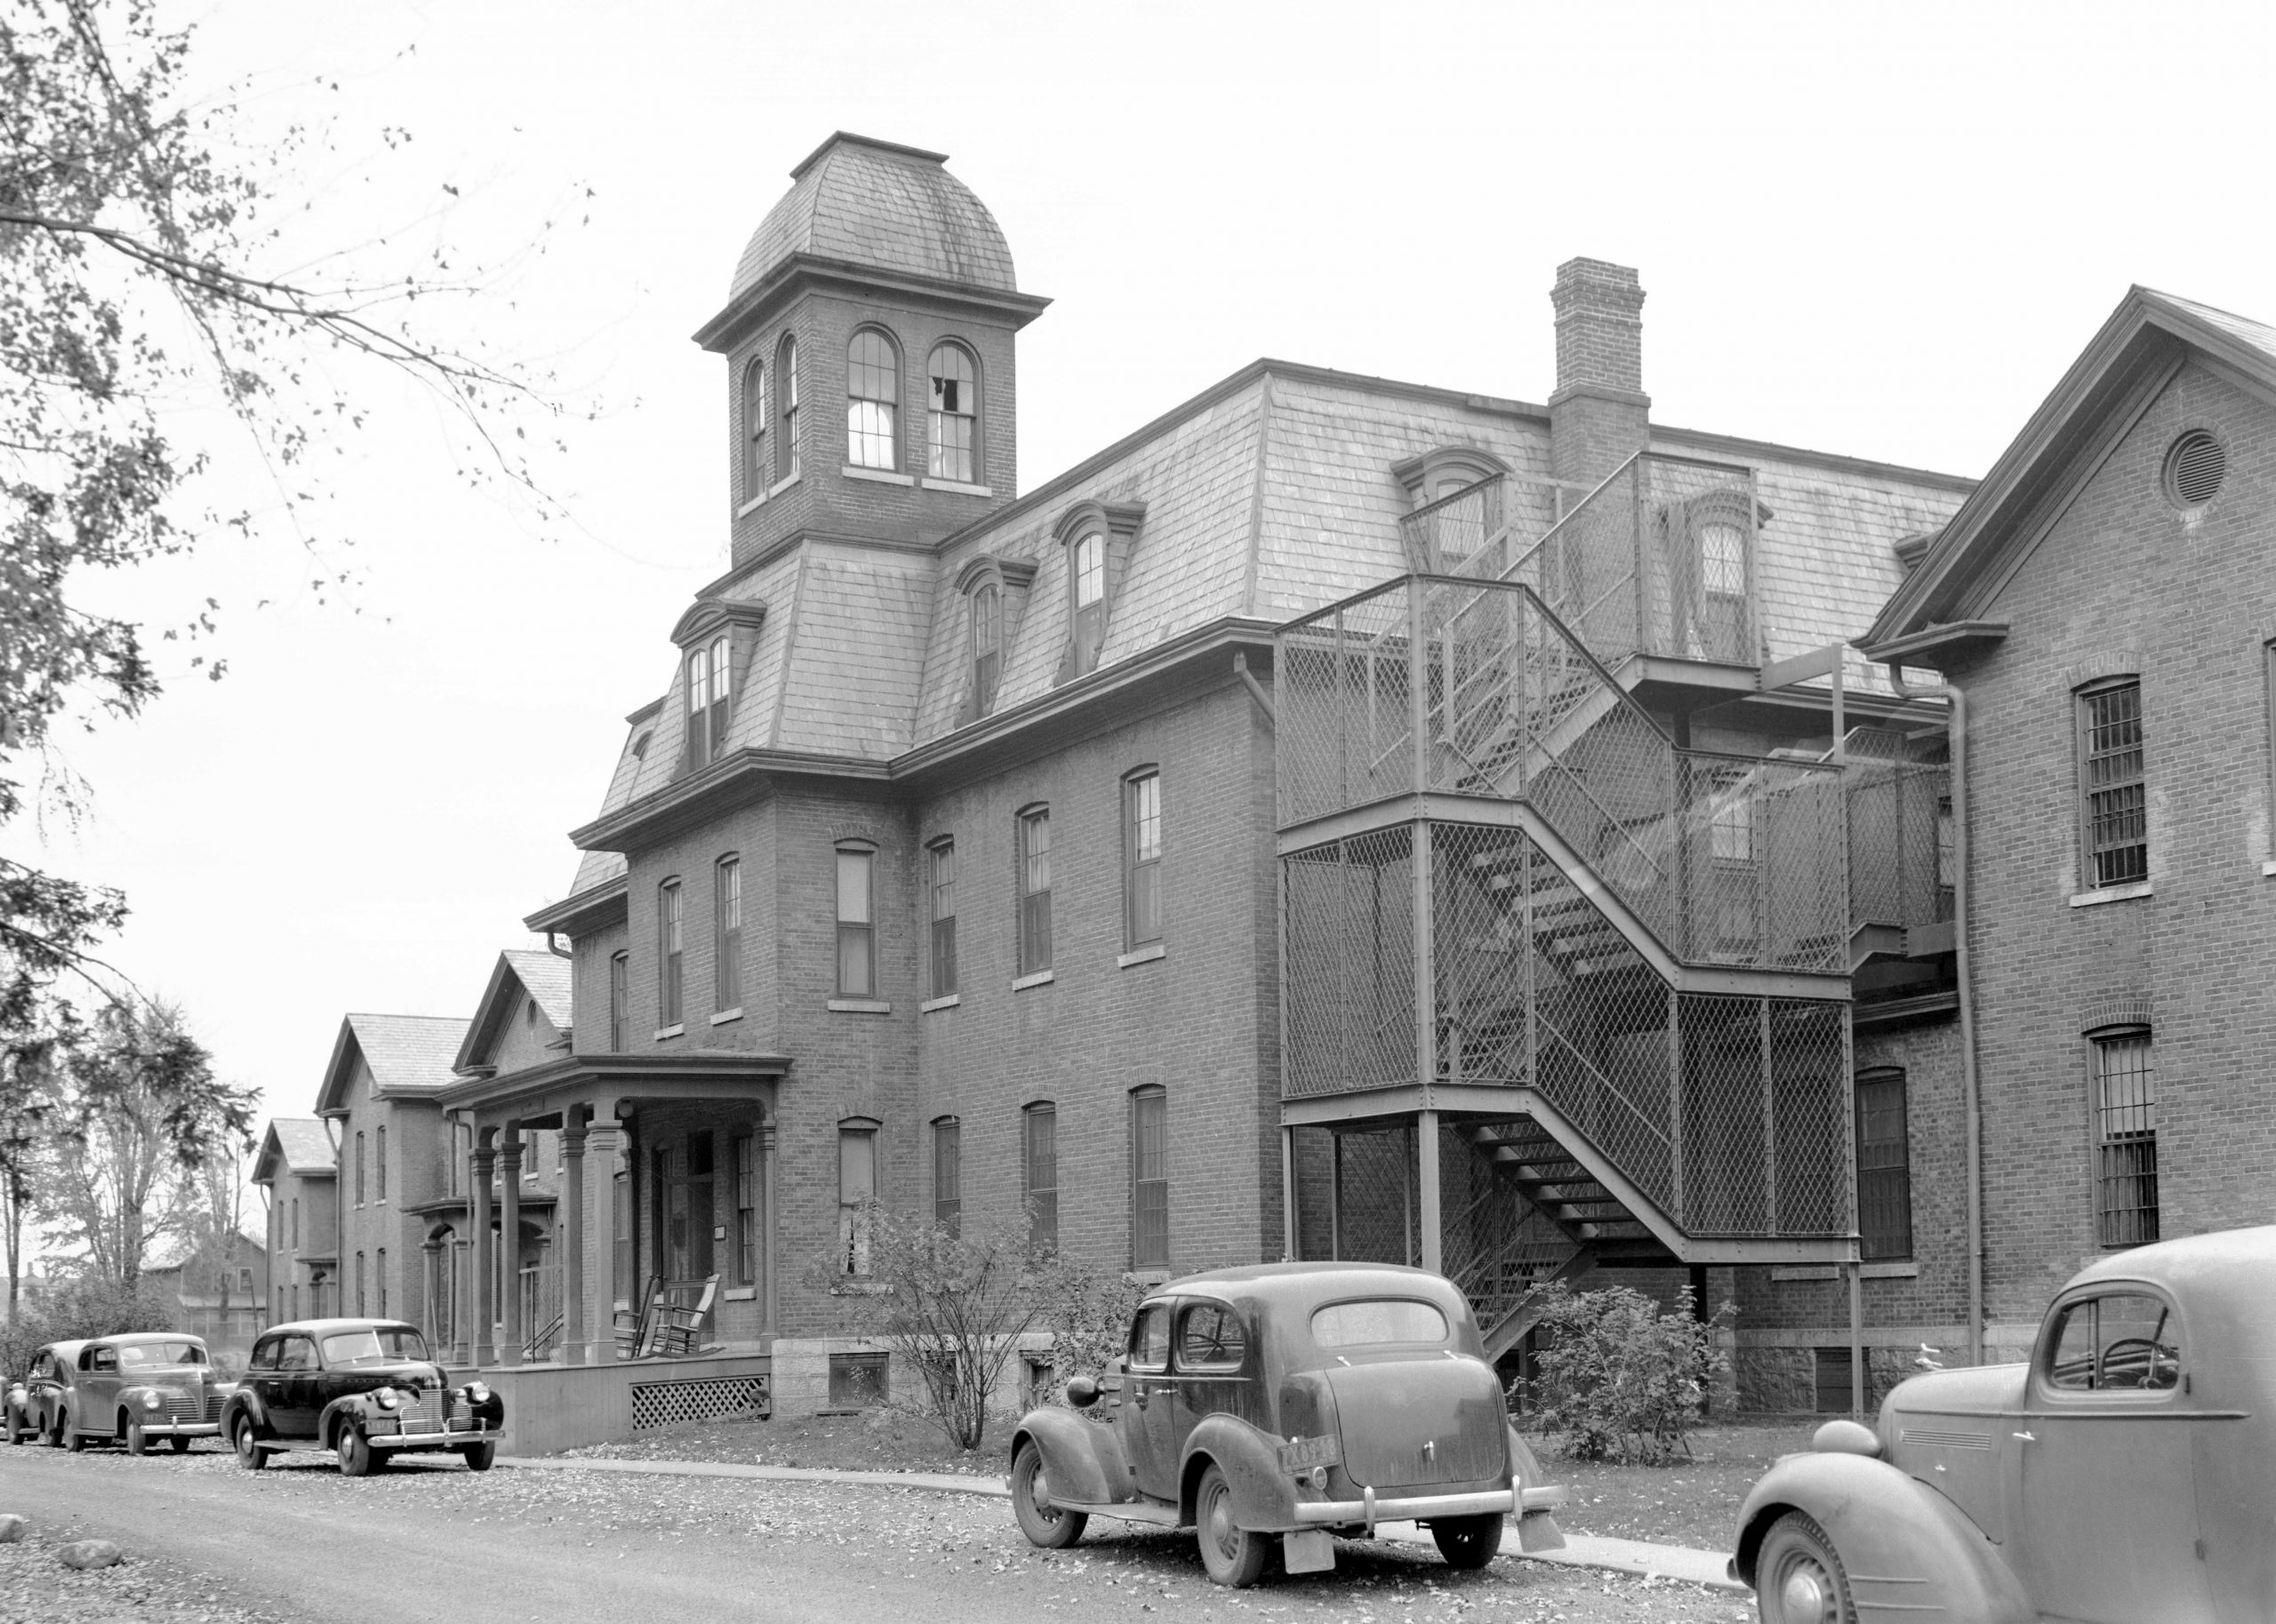 Willard State Hospital among Preservation League’s ‘Seven to Save’ historical sites in NY